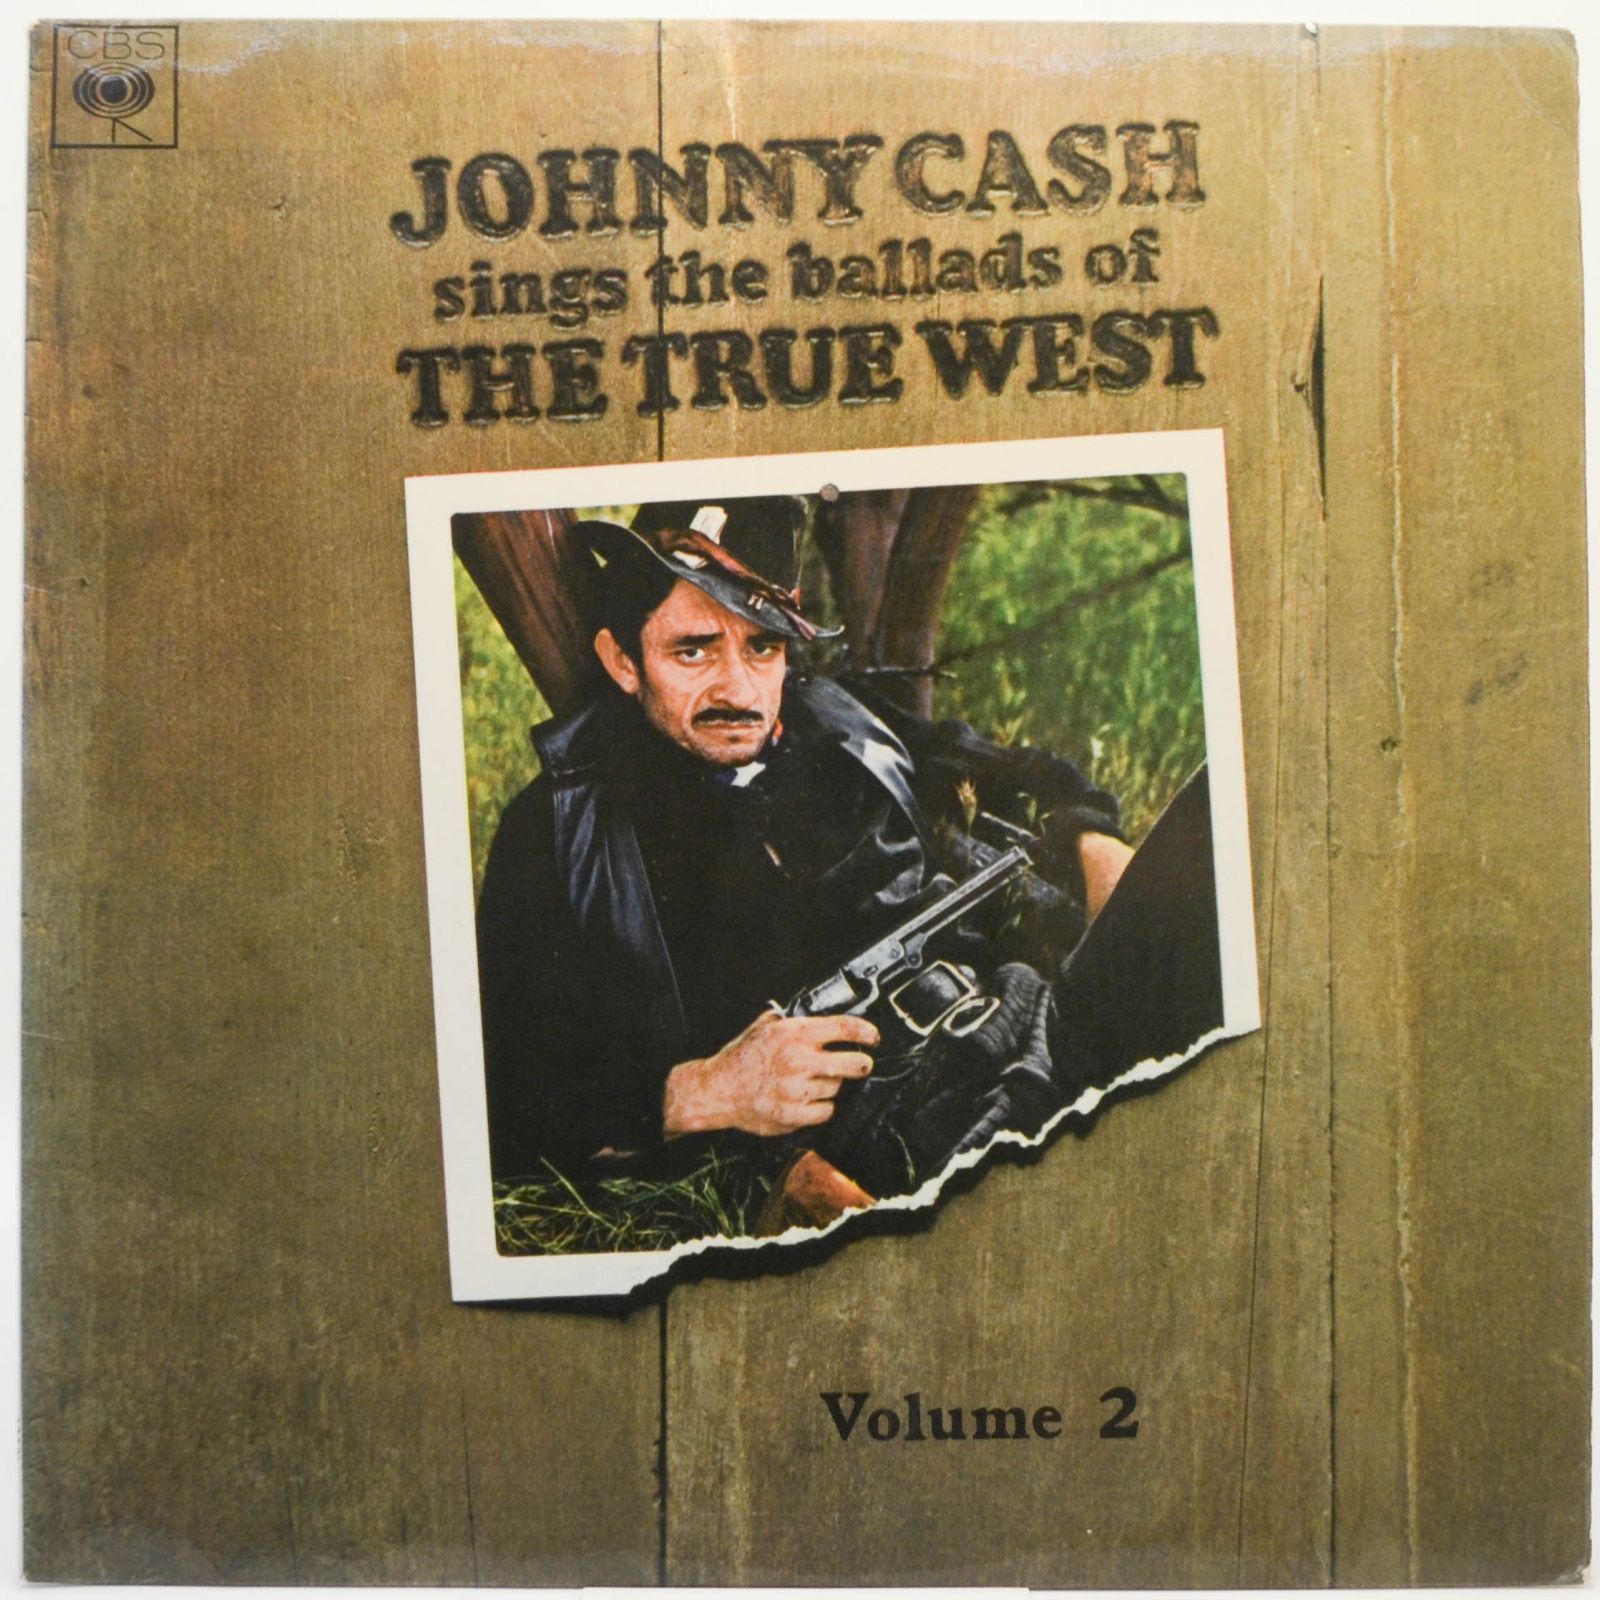 Johnny Cash — Johnny Cash Sings The Ballads Of The True West Vol. 2, 1966